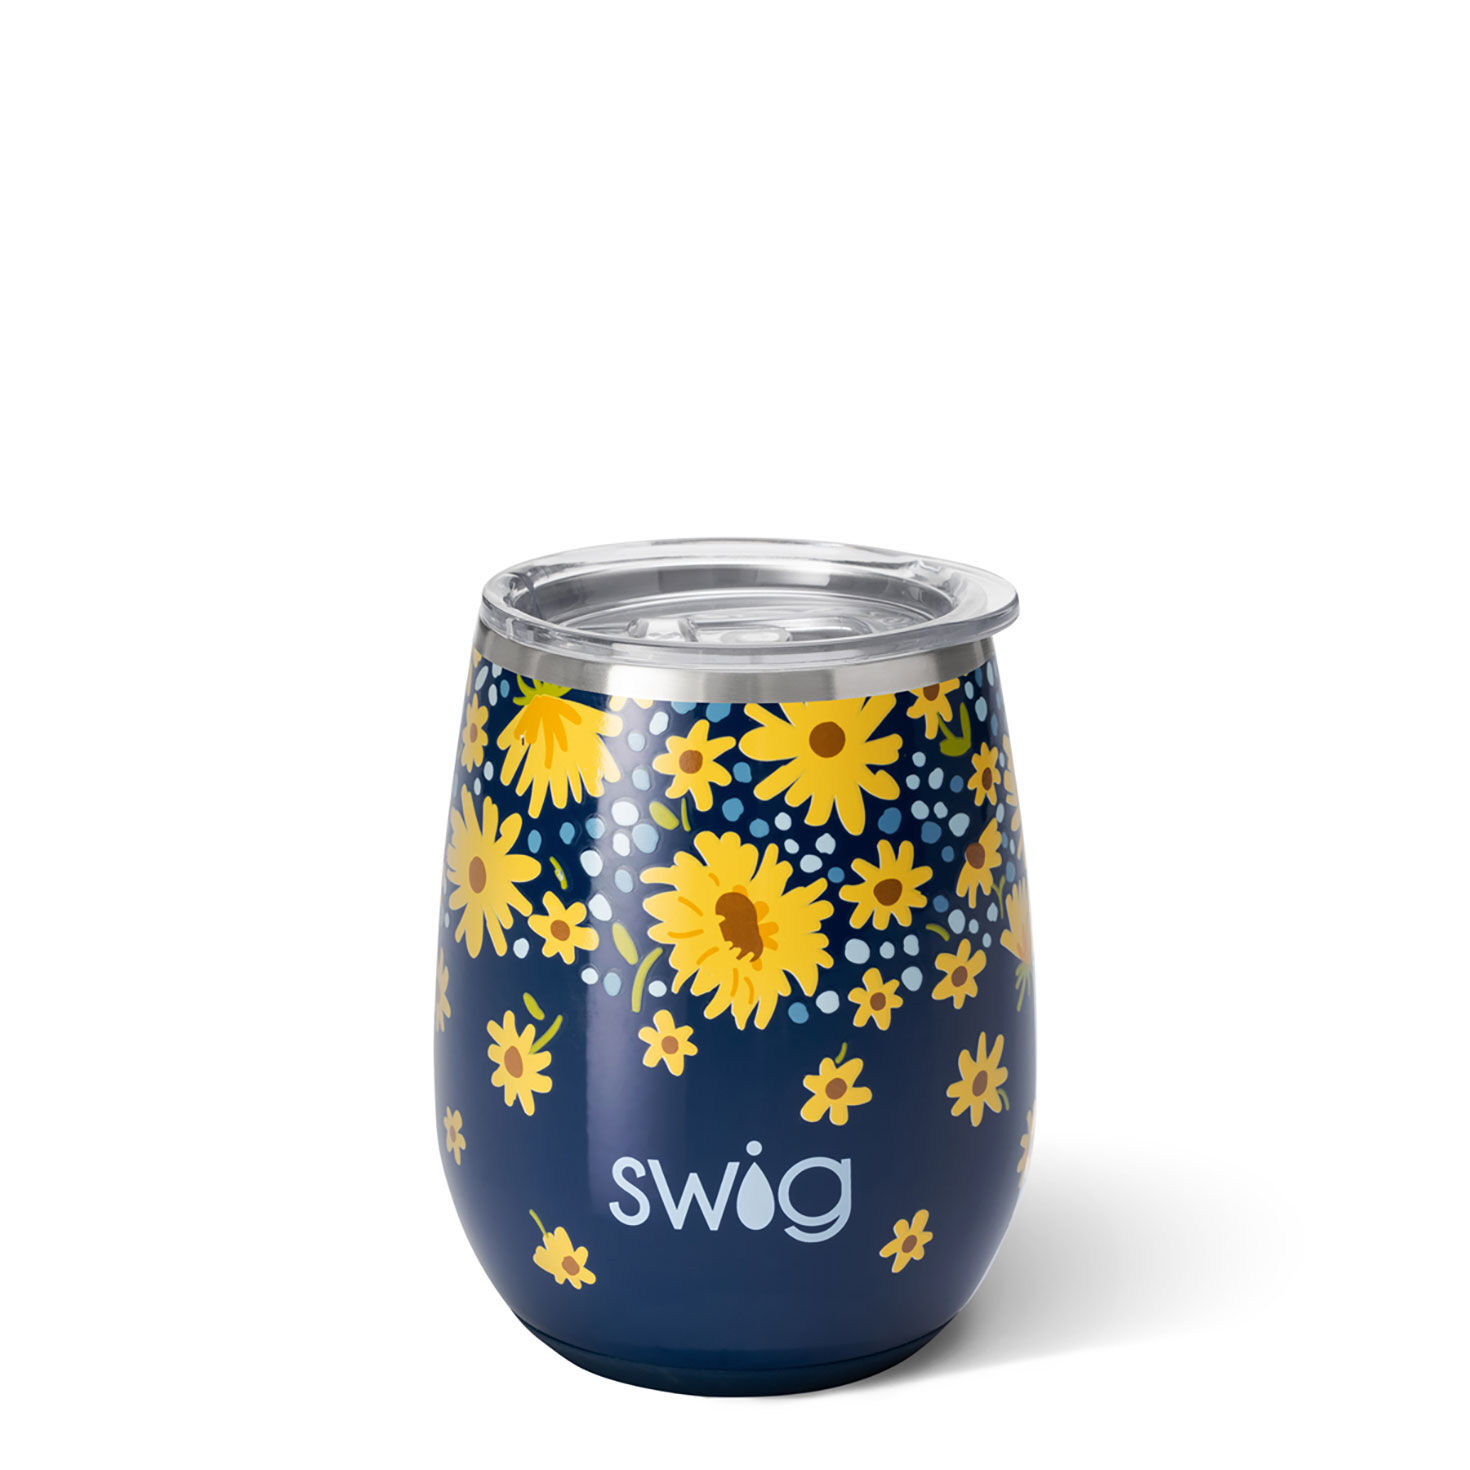 https://www.hallmark.com/dw/image/v2/AALB_PRD/on/demandware.static/-/Sites-hallmark-master/default/dwfe18110b/images/finished-goods/products/S102C14LD/Yellow-Daisies-on-Blue-Insulated-Wine-Cup-With-Lid_S102C14LD_01.jpg?sfrm=jpg